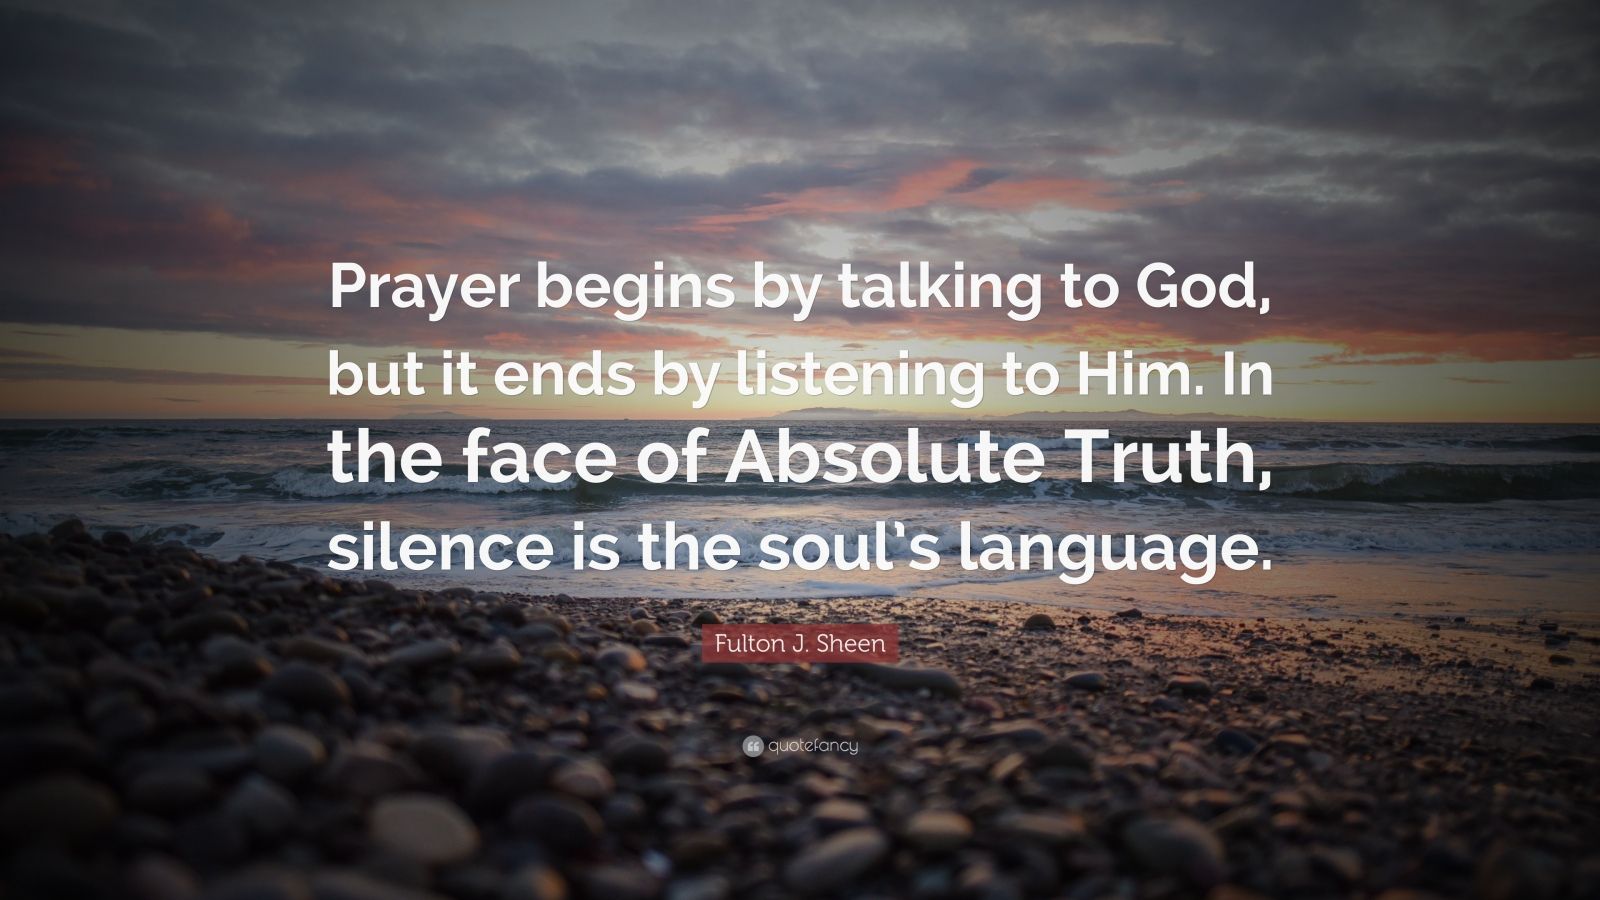 Fulton J. Sheen Quote: “Prayer begins by talking to God, but it ends by